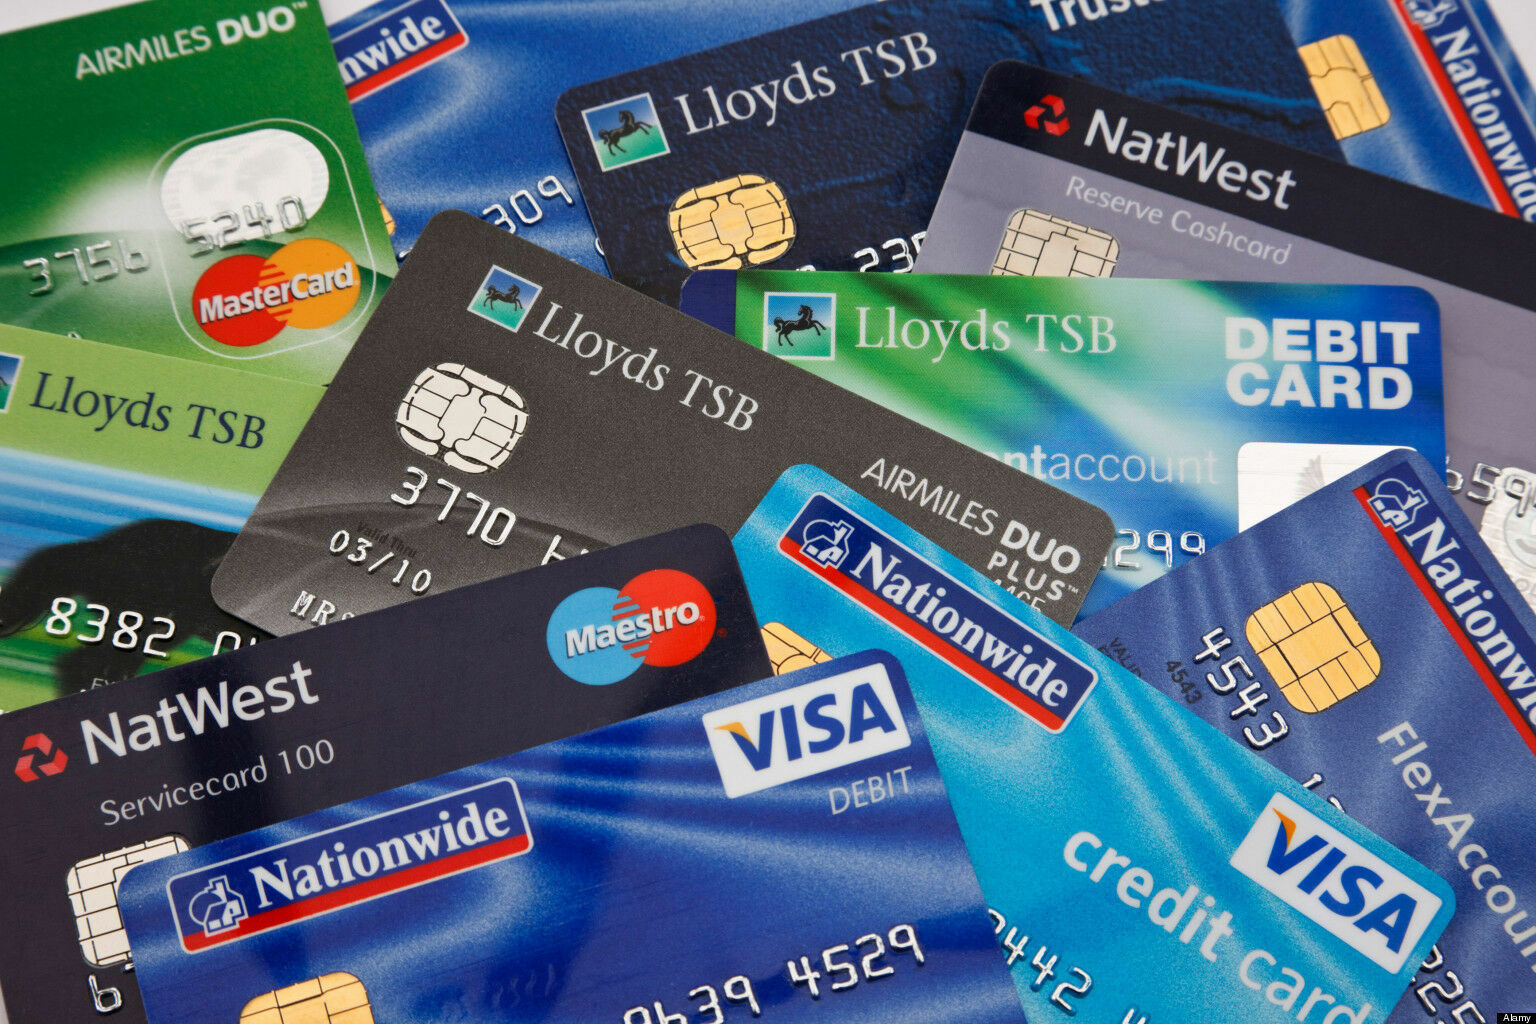 Banks in April raised the limits on new credit cards to a record